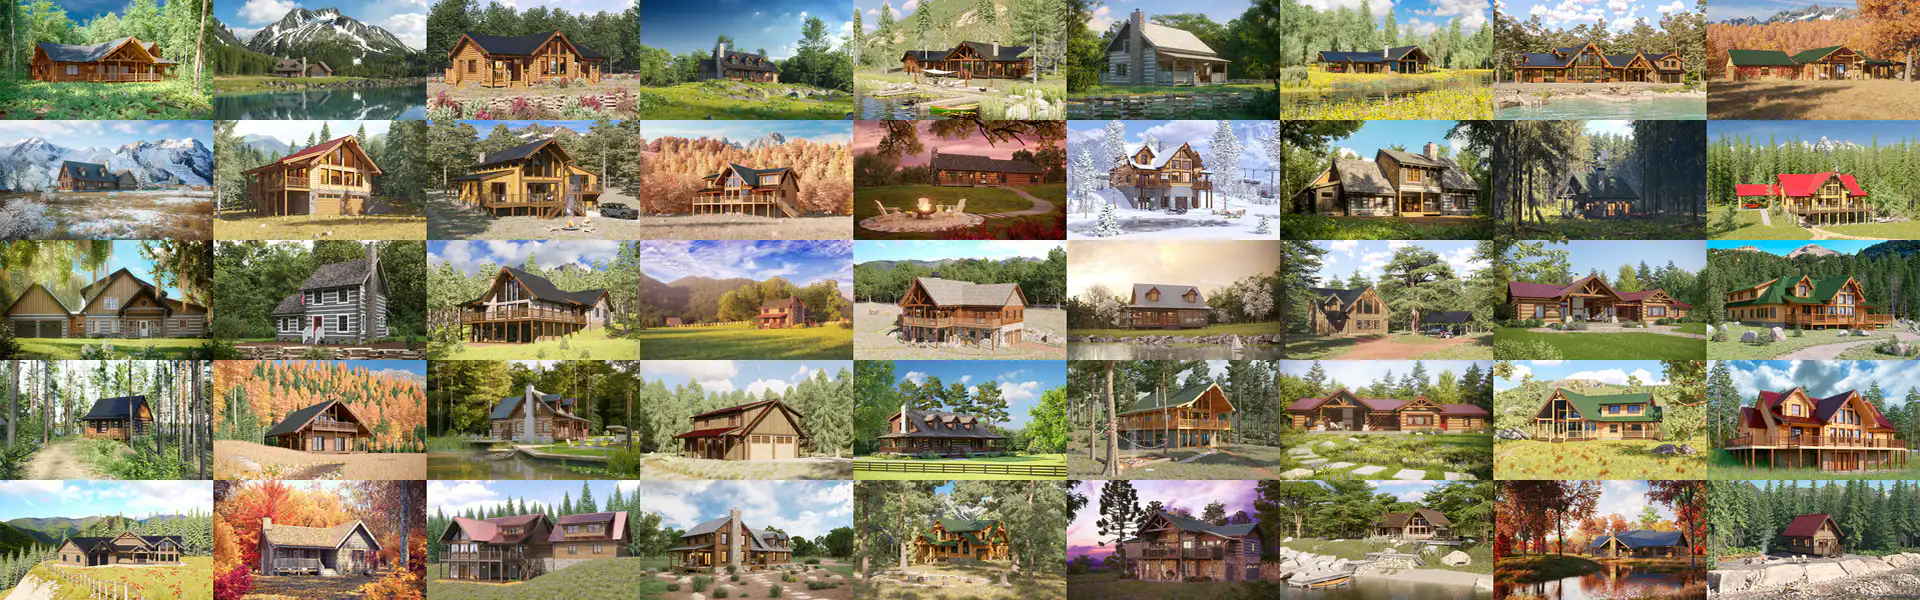 Completed Projects on 3D Rendering of Log and Timber Homes